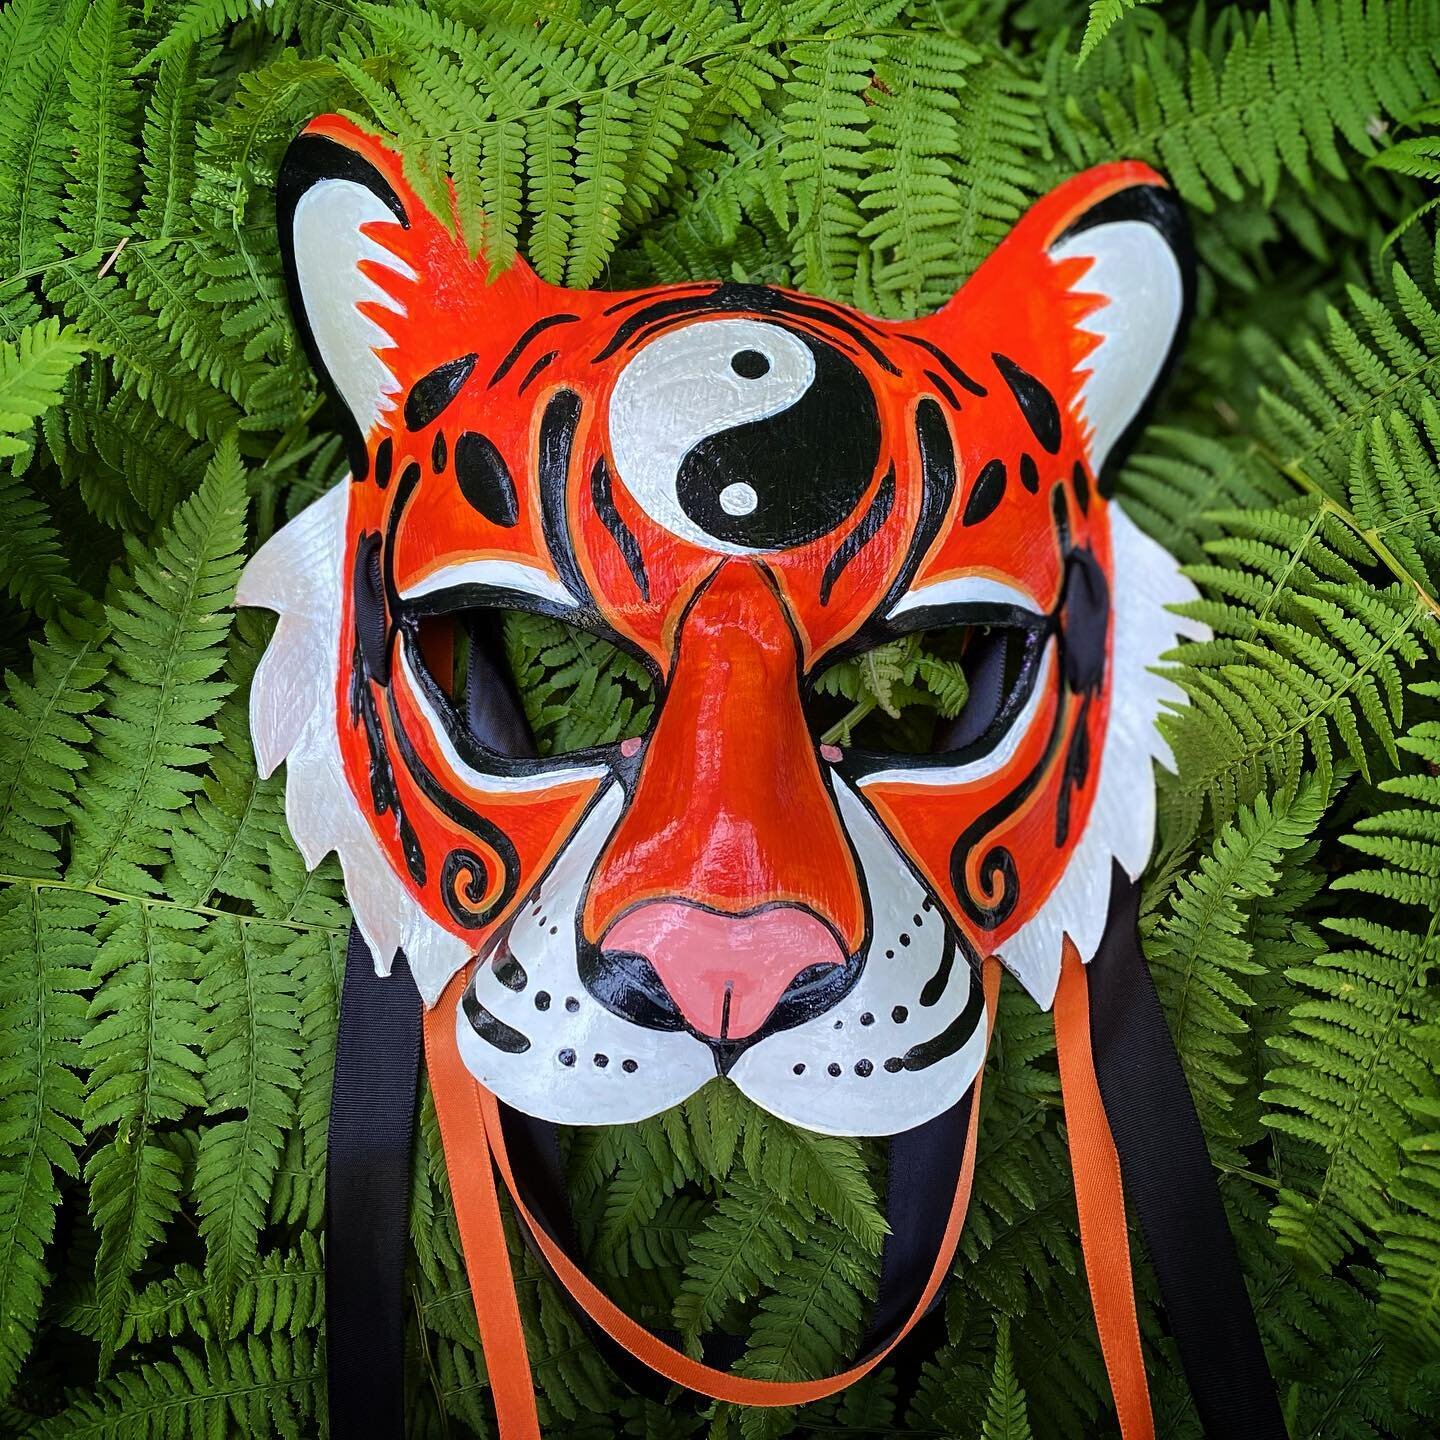 This tiger will be going to Germany tomorrow! It&rsquo;s always fun working with musical artists who want to use my masks as part of their performances 🐅 #leather #mask #costume #etsy #artistsoninstagram